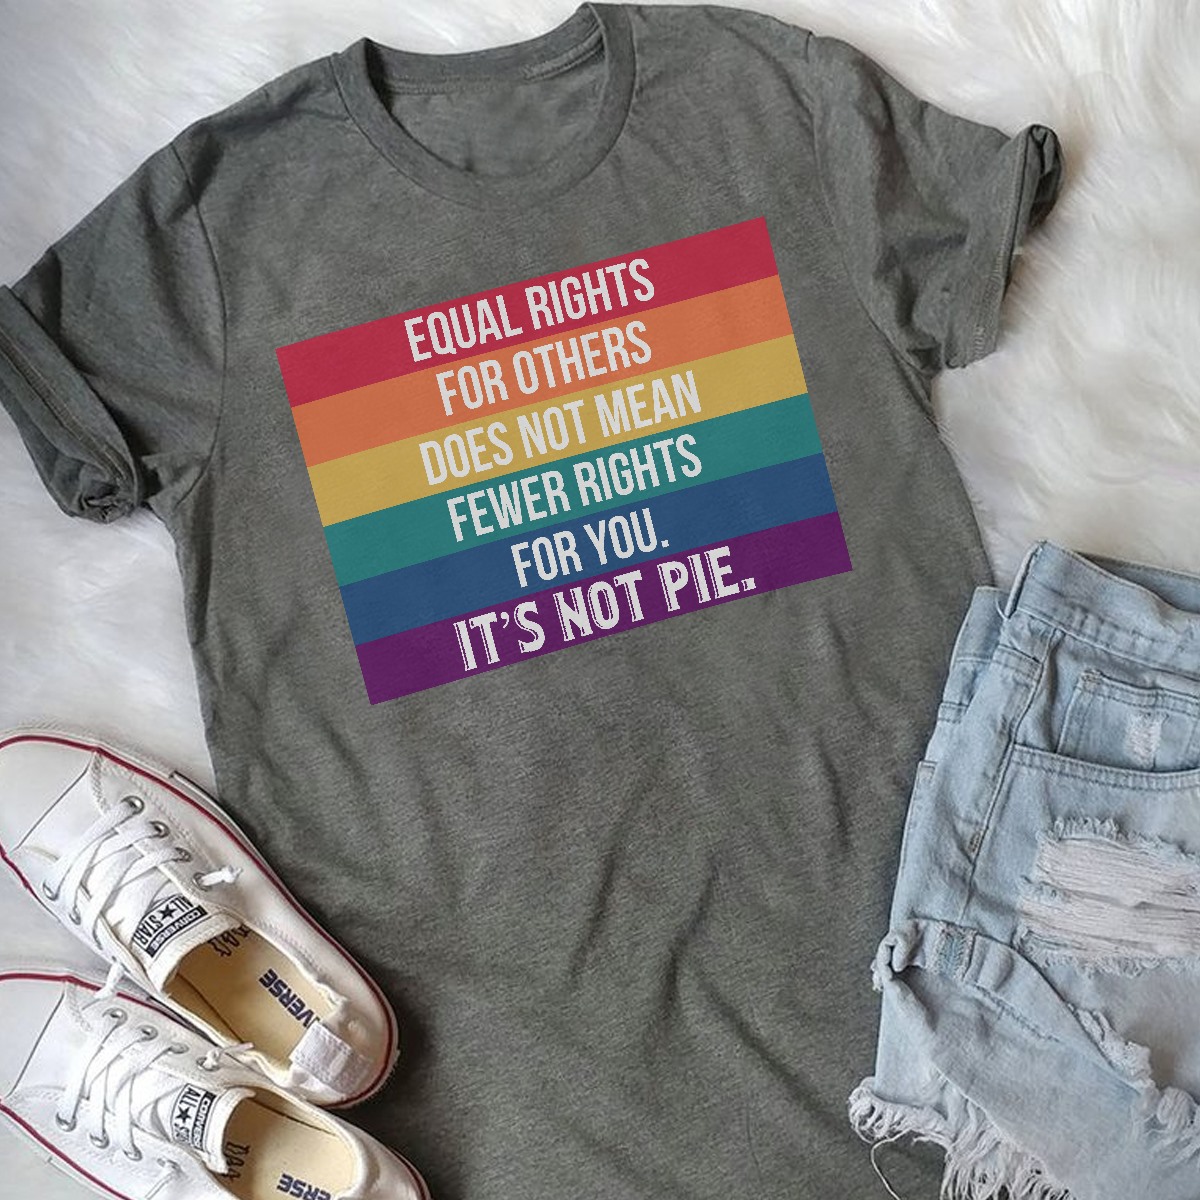 Equal rights for others does not mean fewer rights for you, it's not pie – Lgbt community